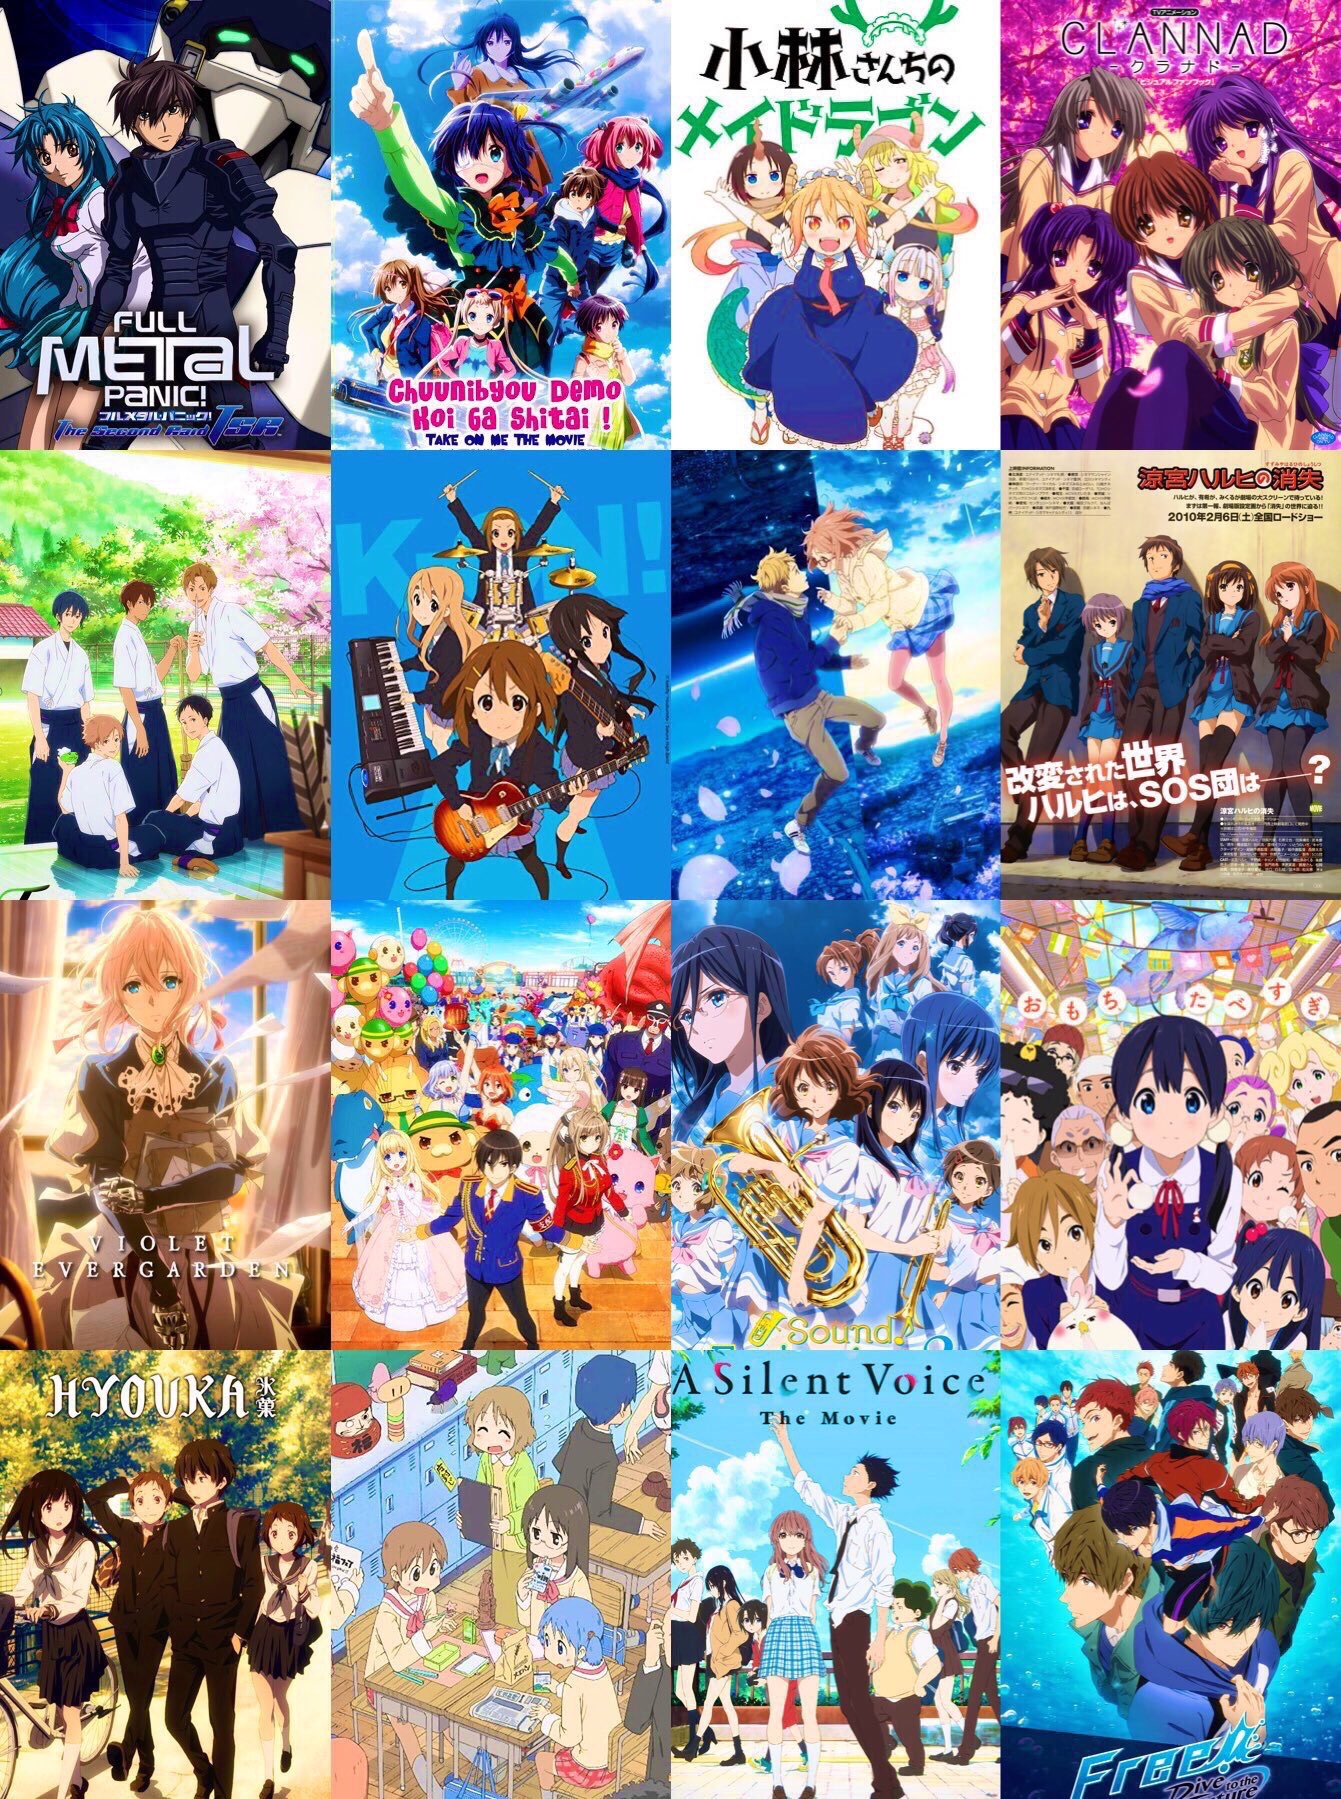 A montage of Kyōto Animation projects that is being widely circulated on social media